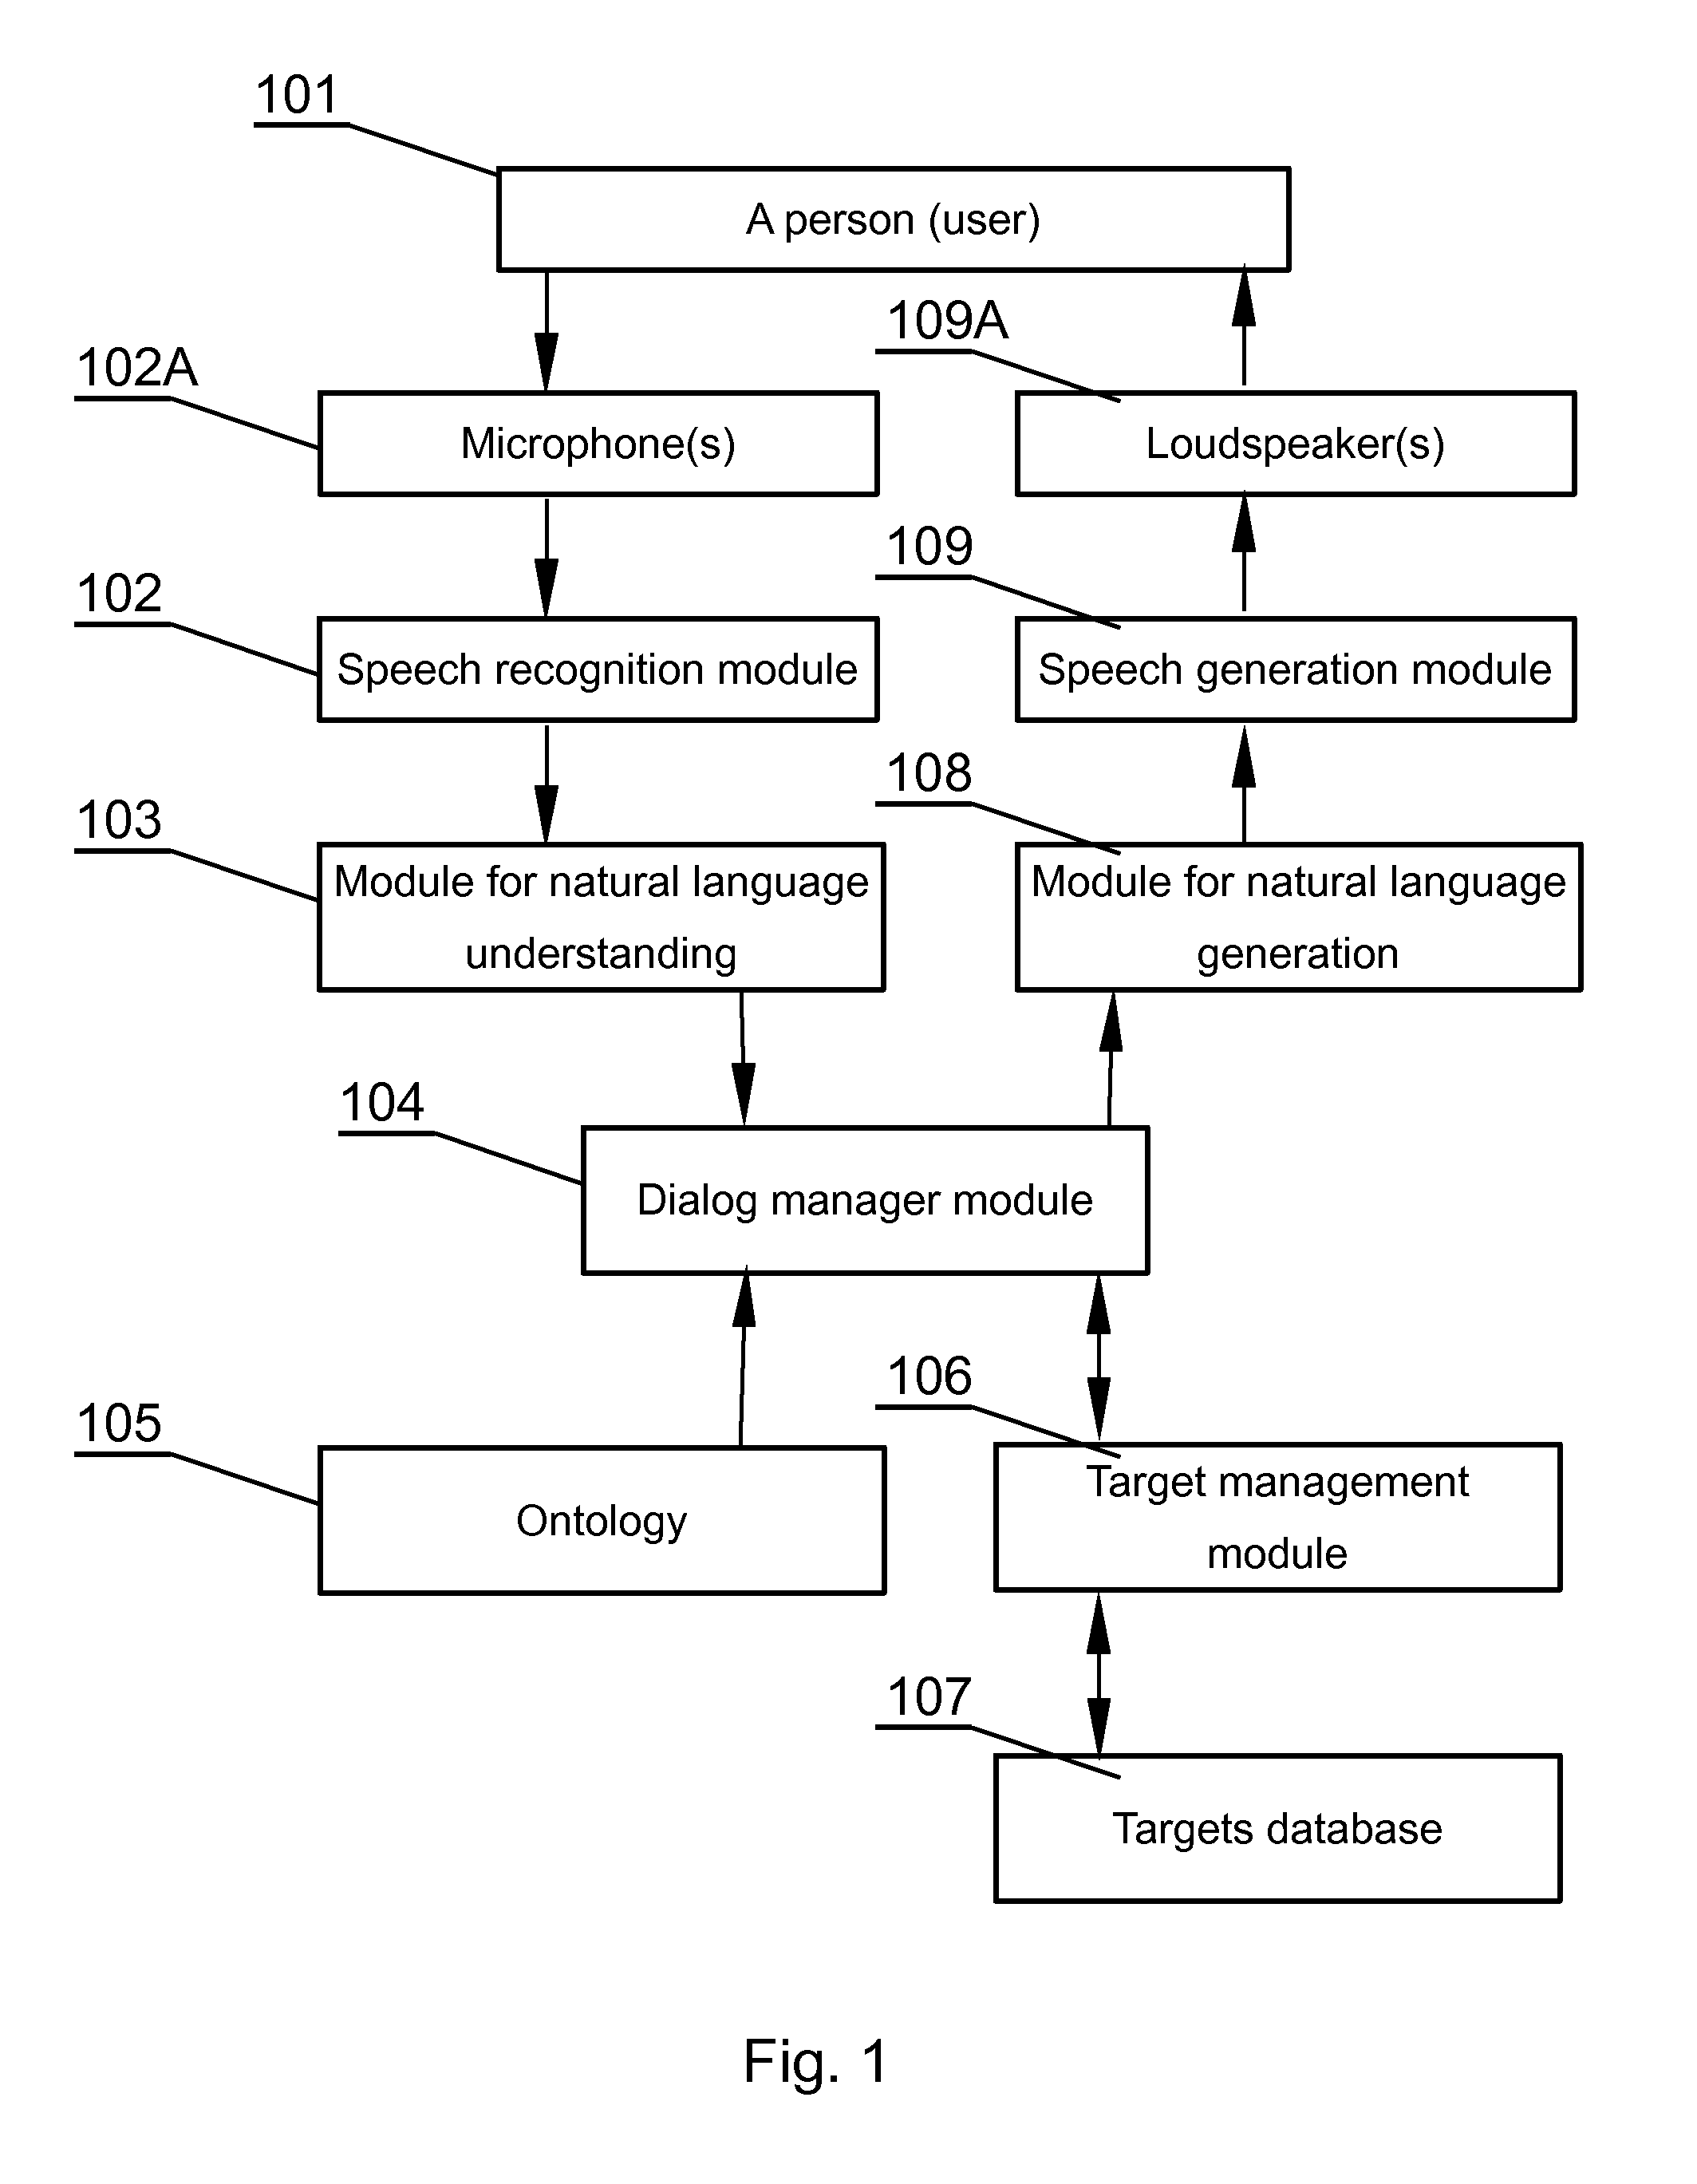 Speech recognition system and a method of using dynamic bayesian network models